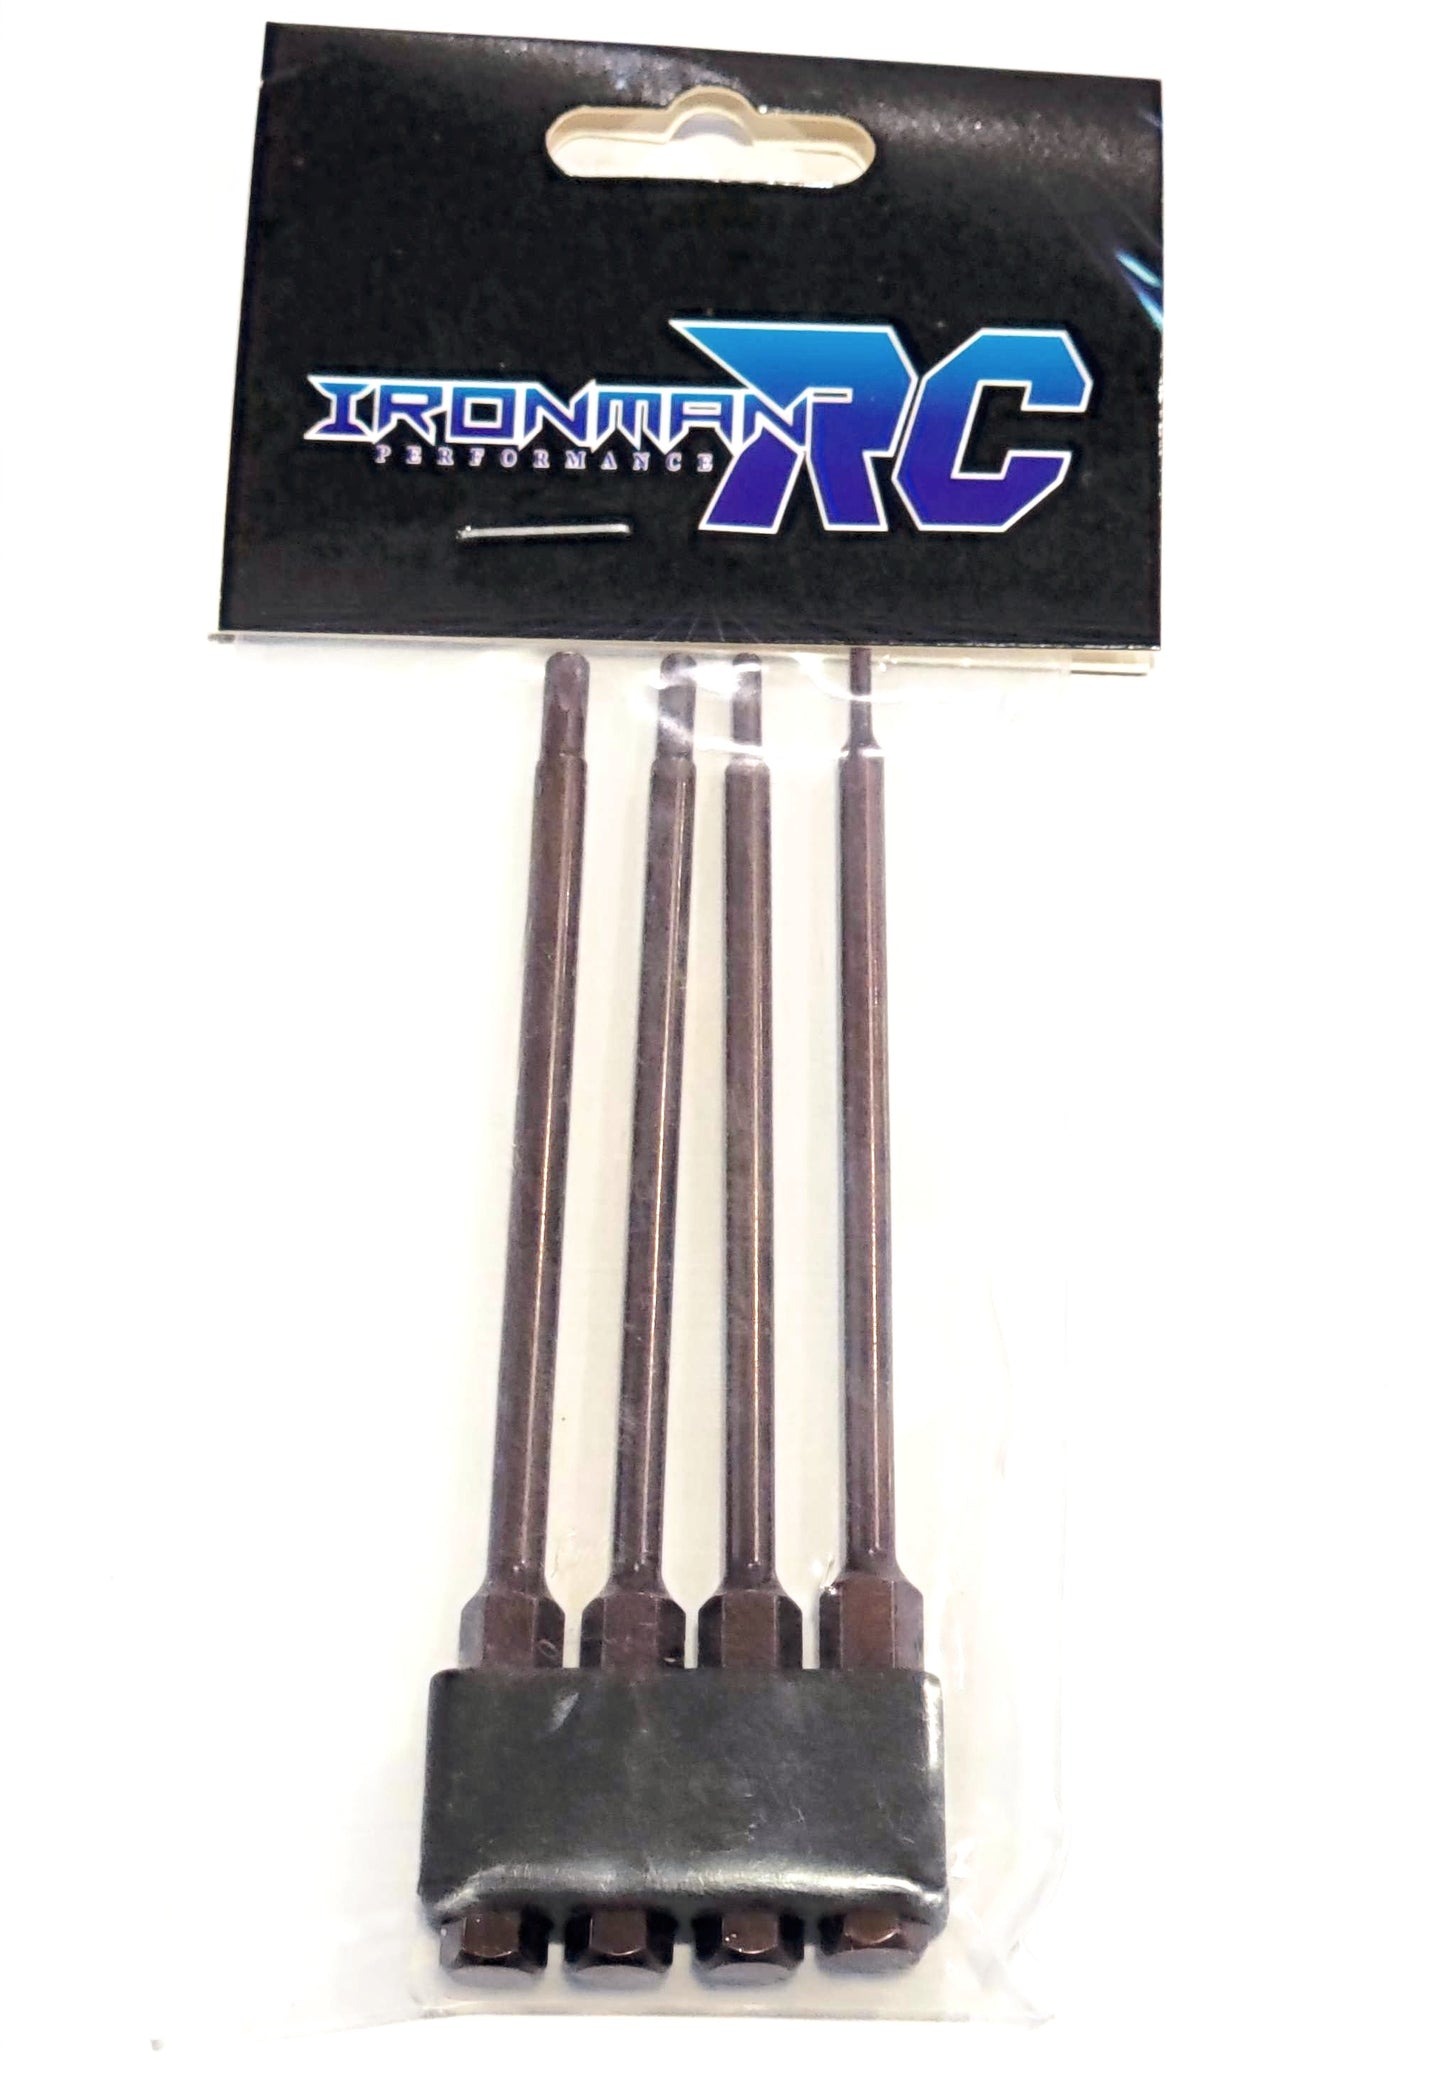 IRonManRc MAGNETIC Dysnasty Drivers 1/4 Metric Drill Tip Set 1.5 2.0 2.5 3.0